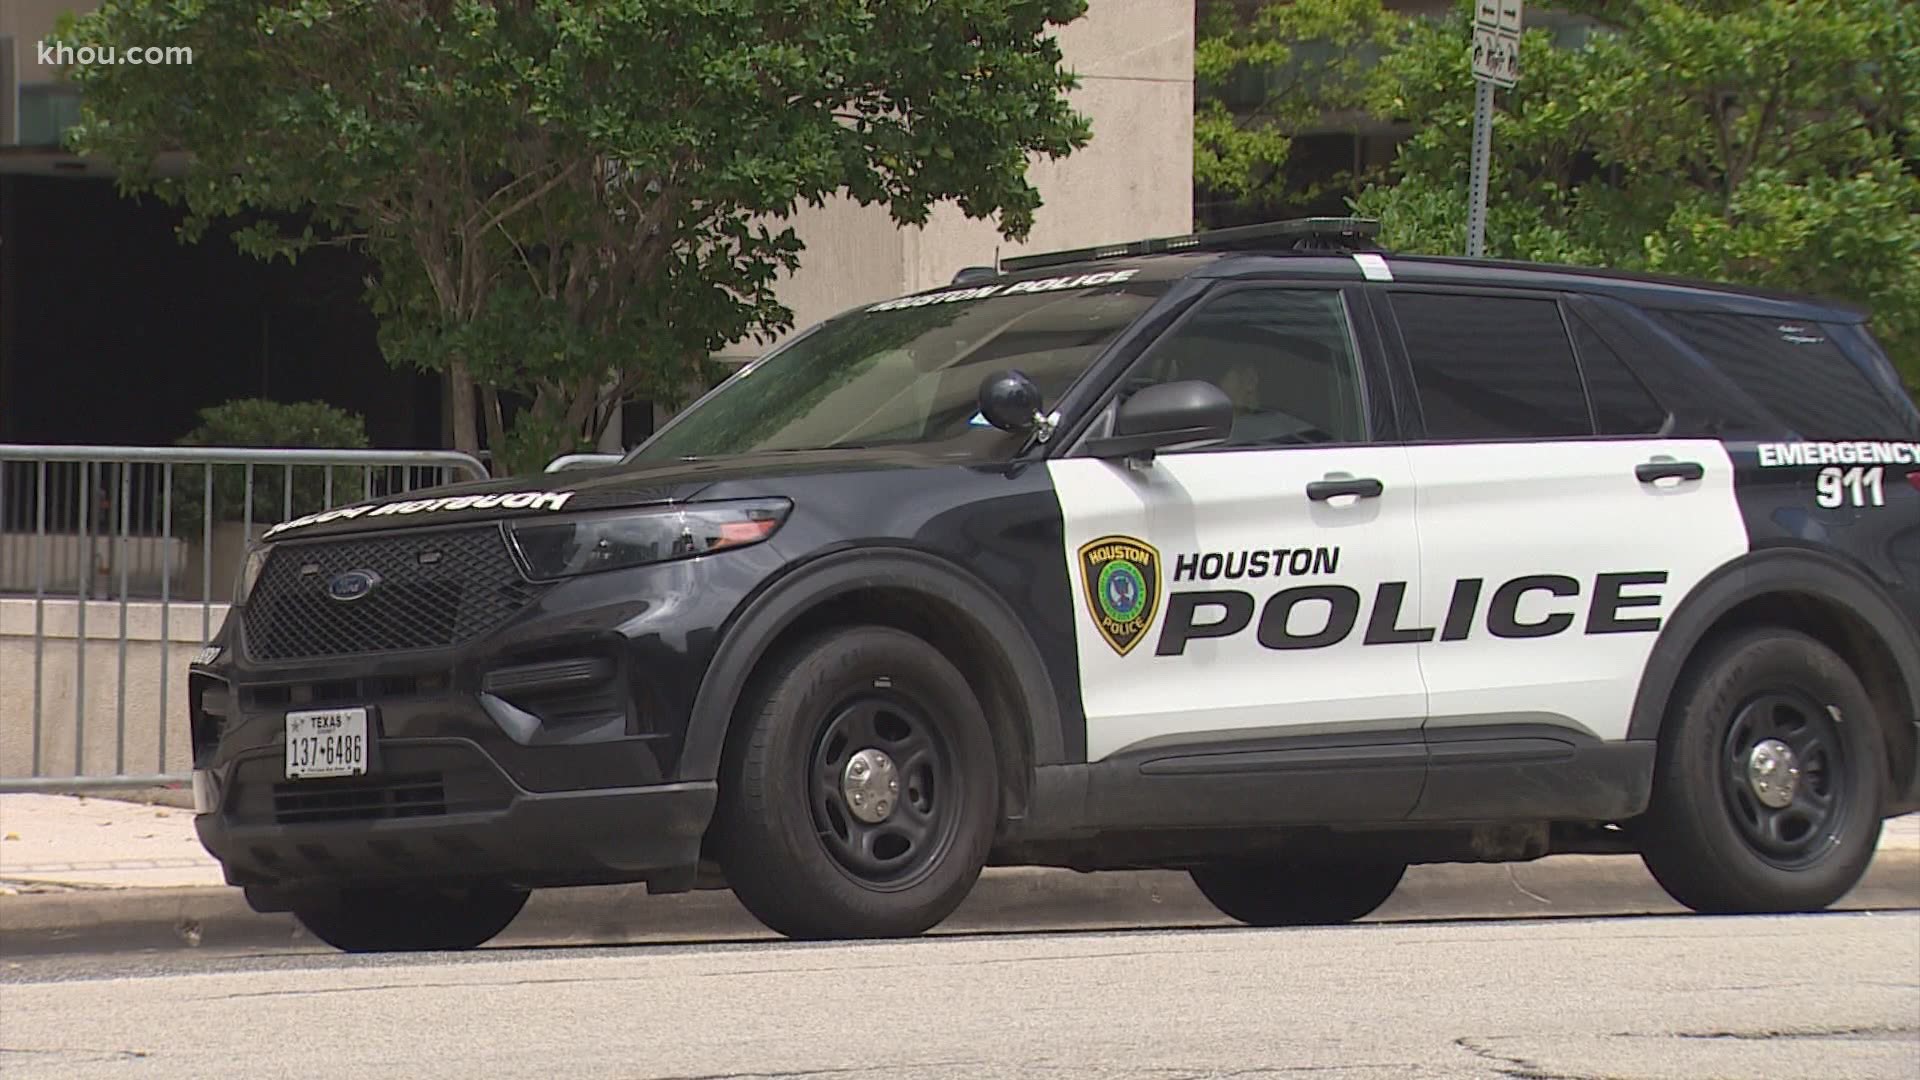 The 45-member team has been designing a plan to improve relations between the Houston Police Department and the community it serves.